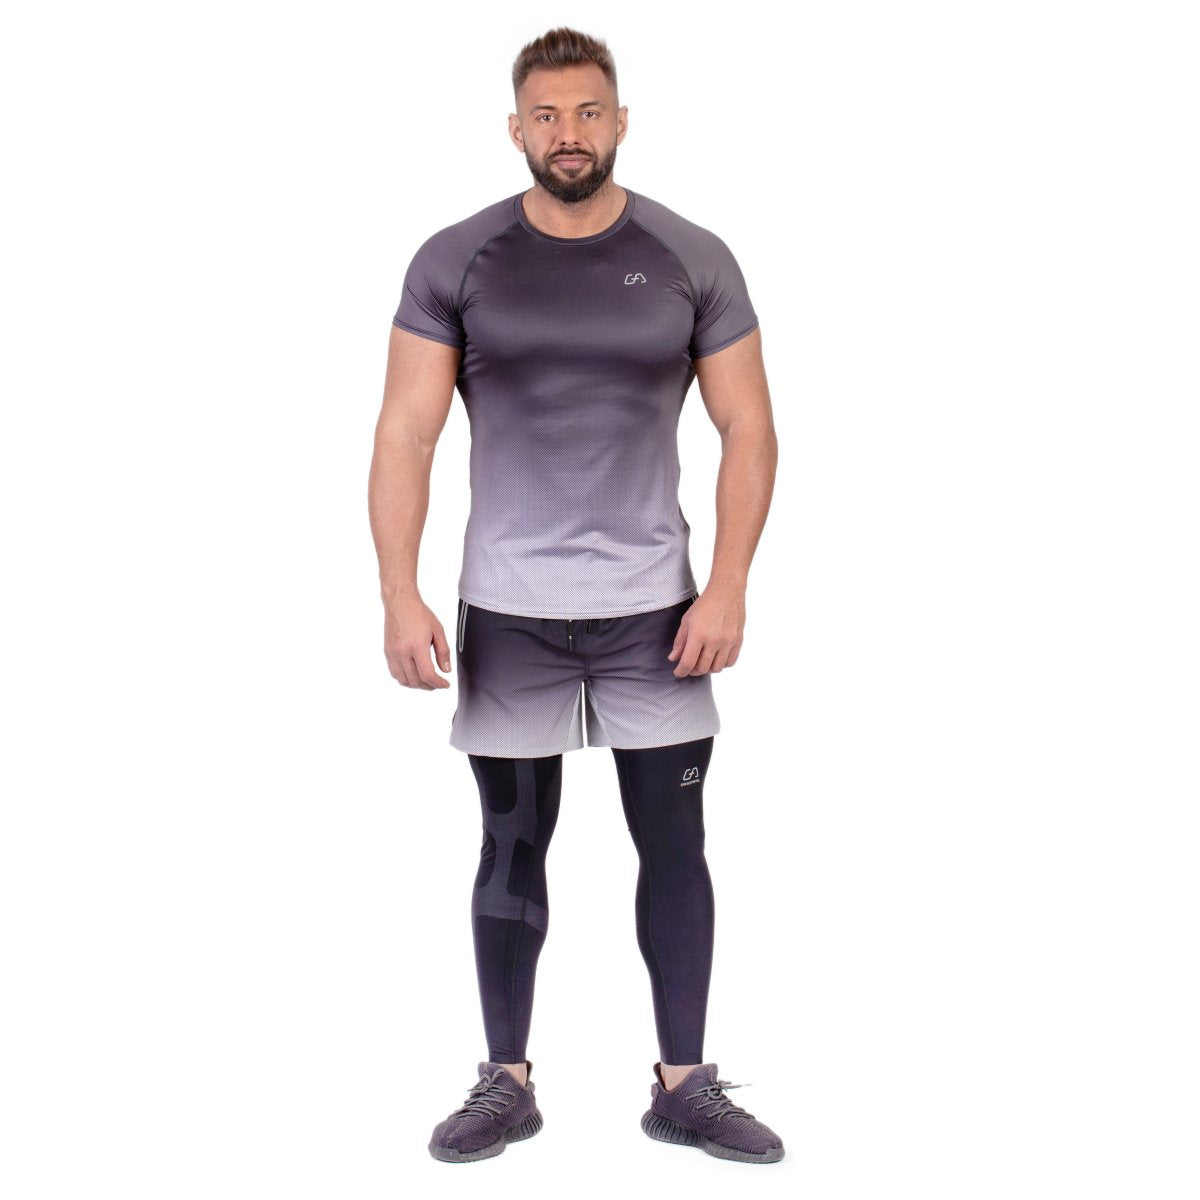 B91xZ Workout Shirts For Men Male Summer Casual Gradient Print